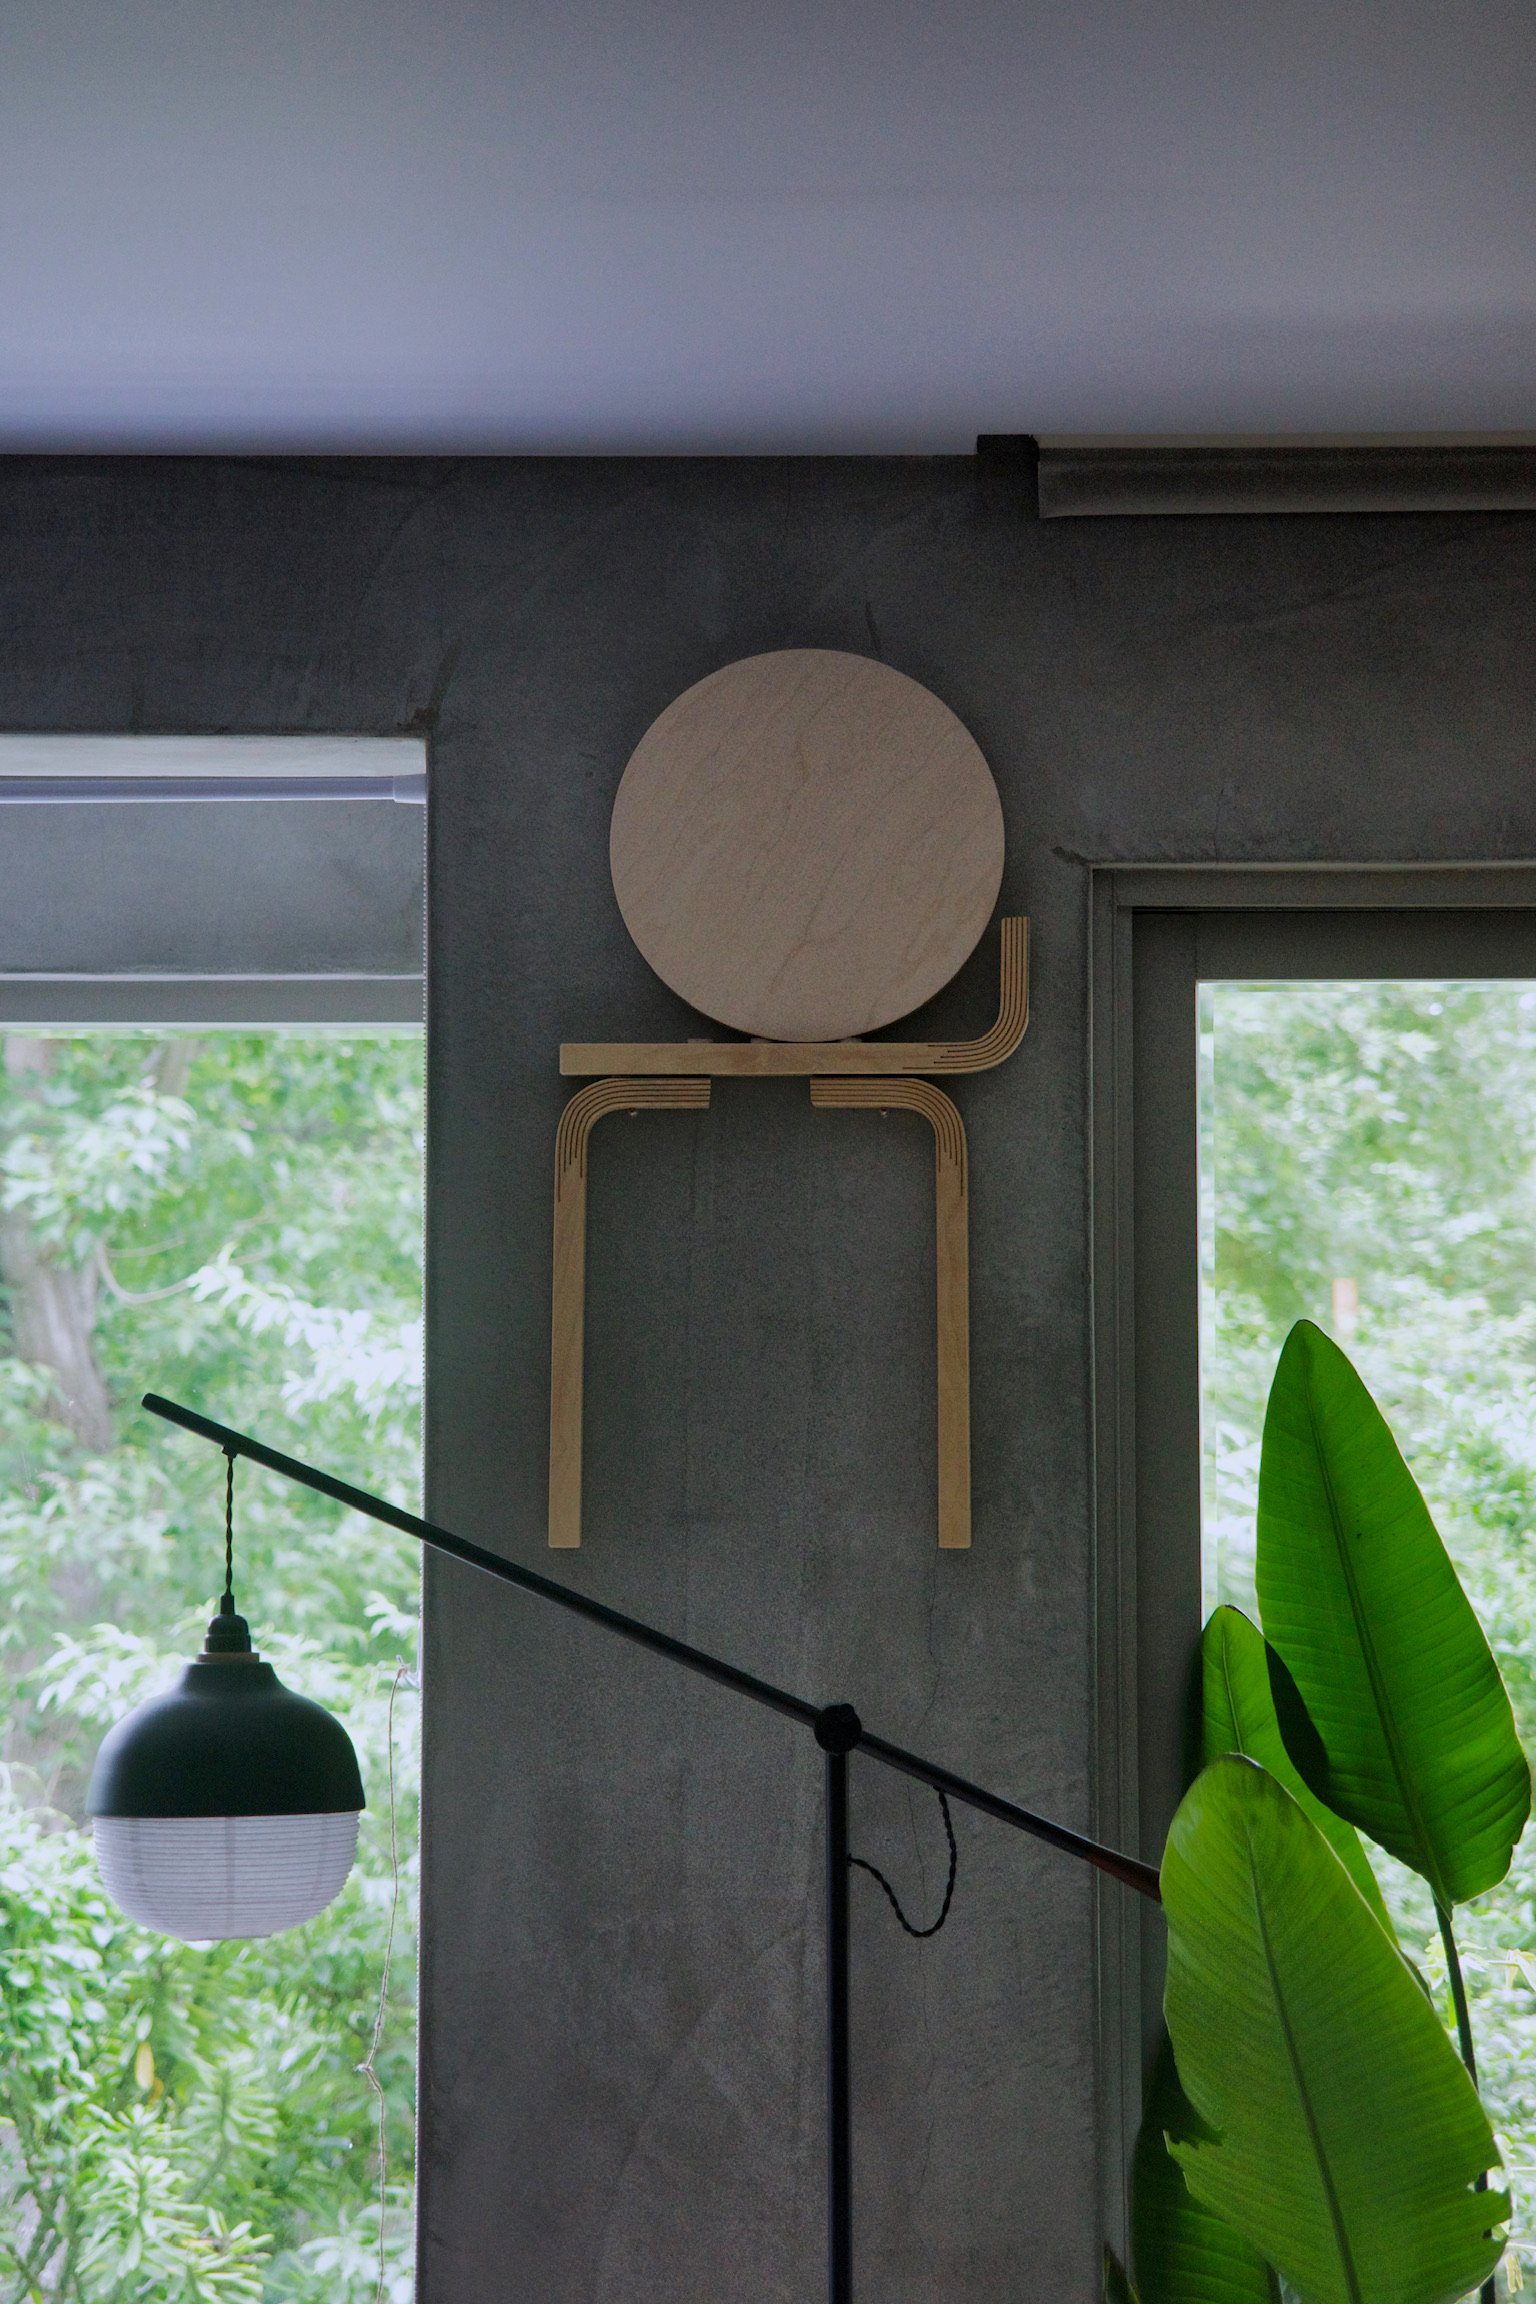 Artek Stool 60 the Kontrasti edition disassembled and hung on a concrete wall as art. Greenery outside the window.